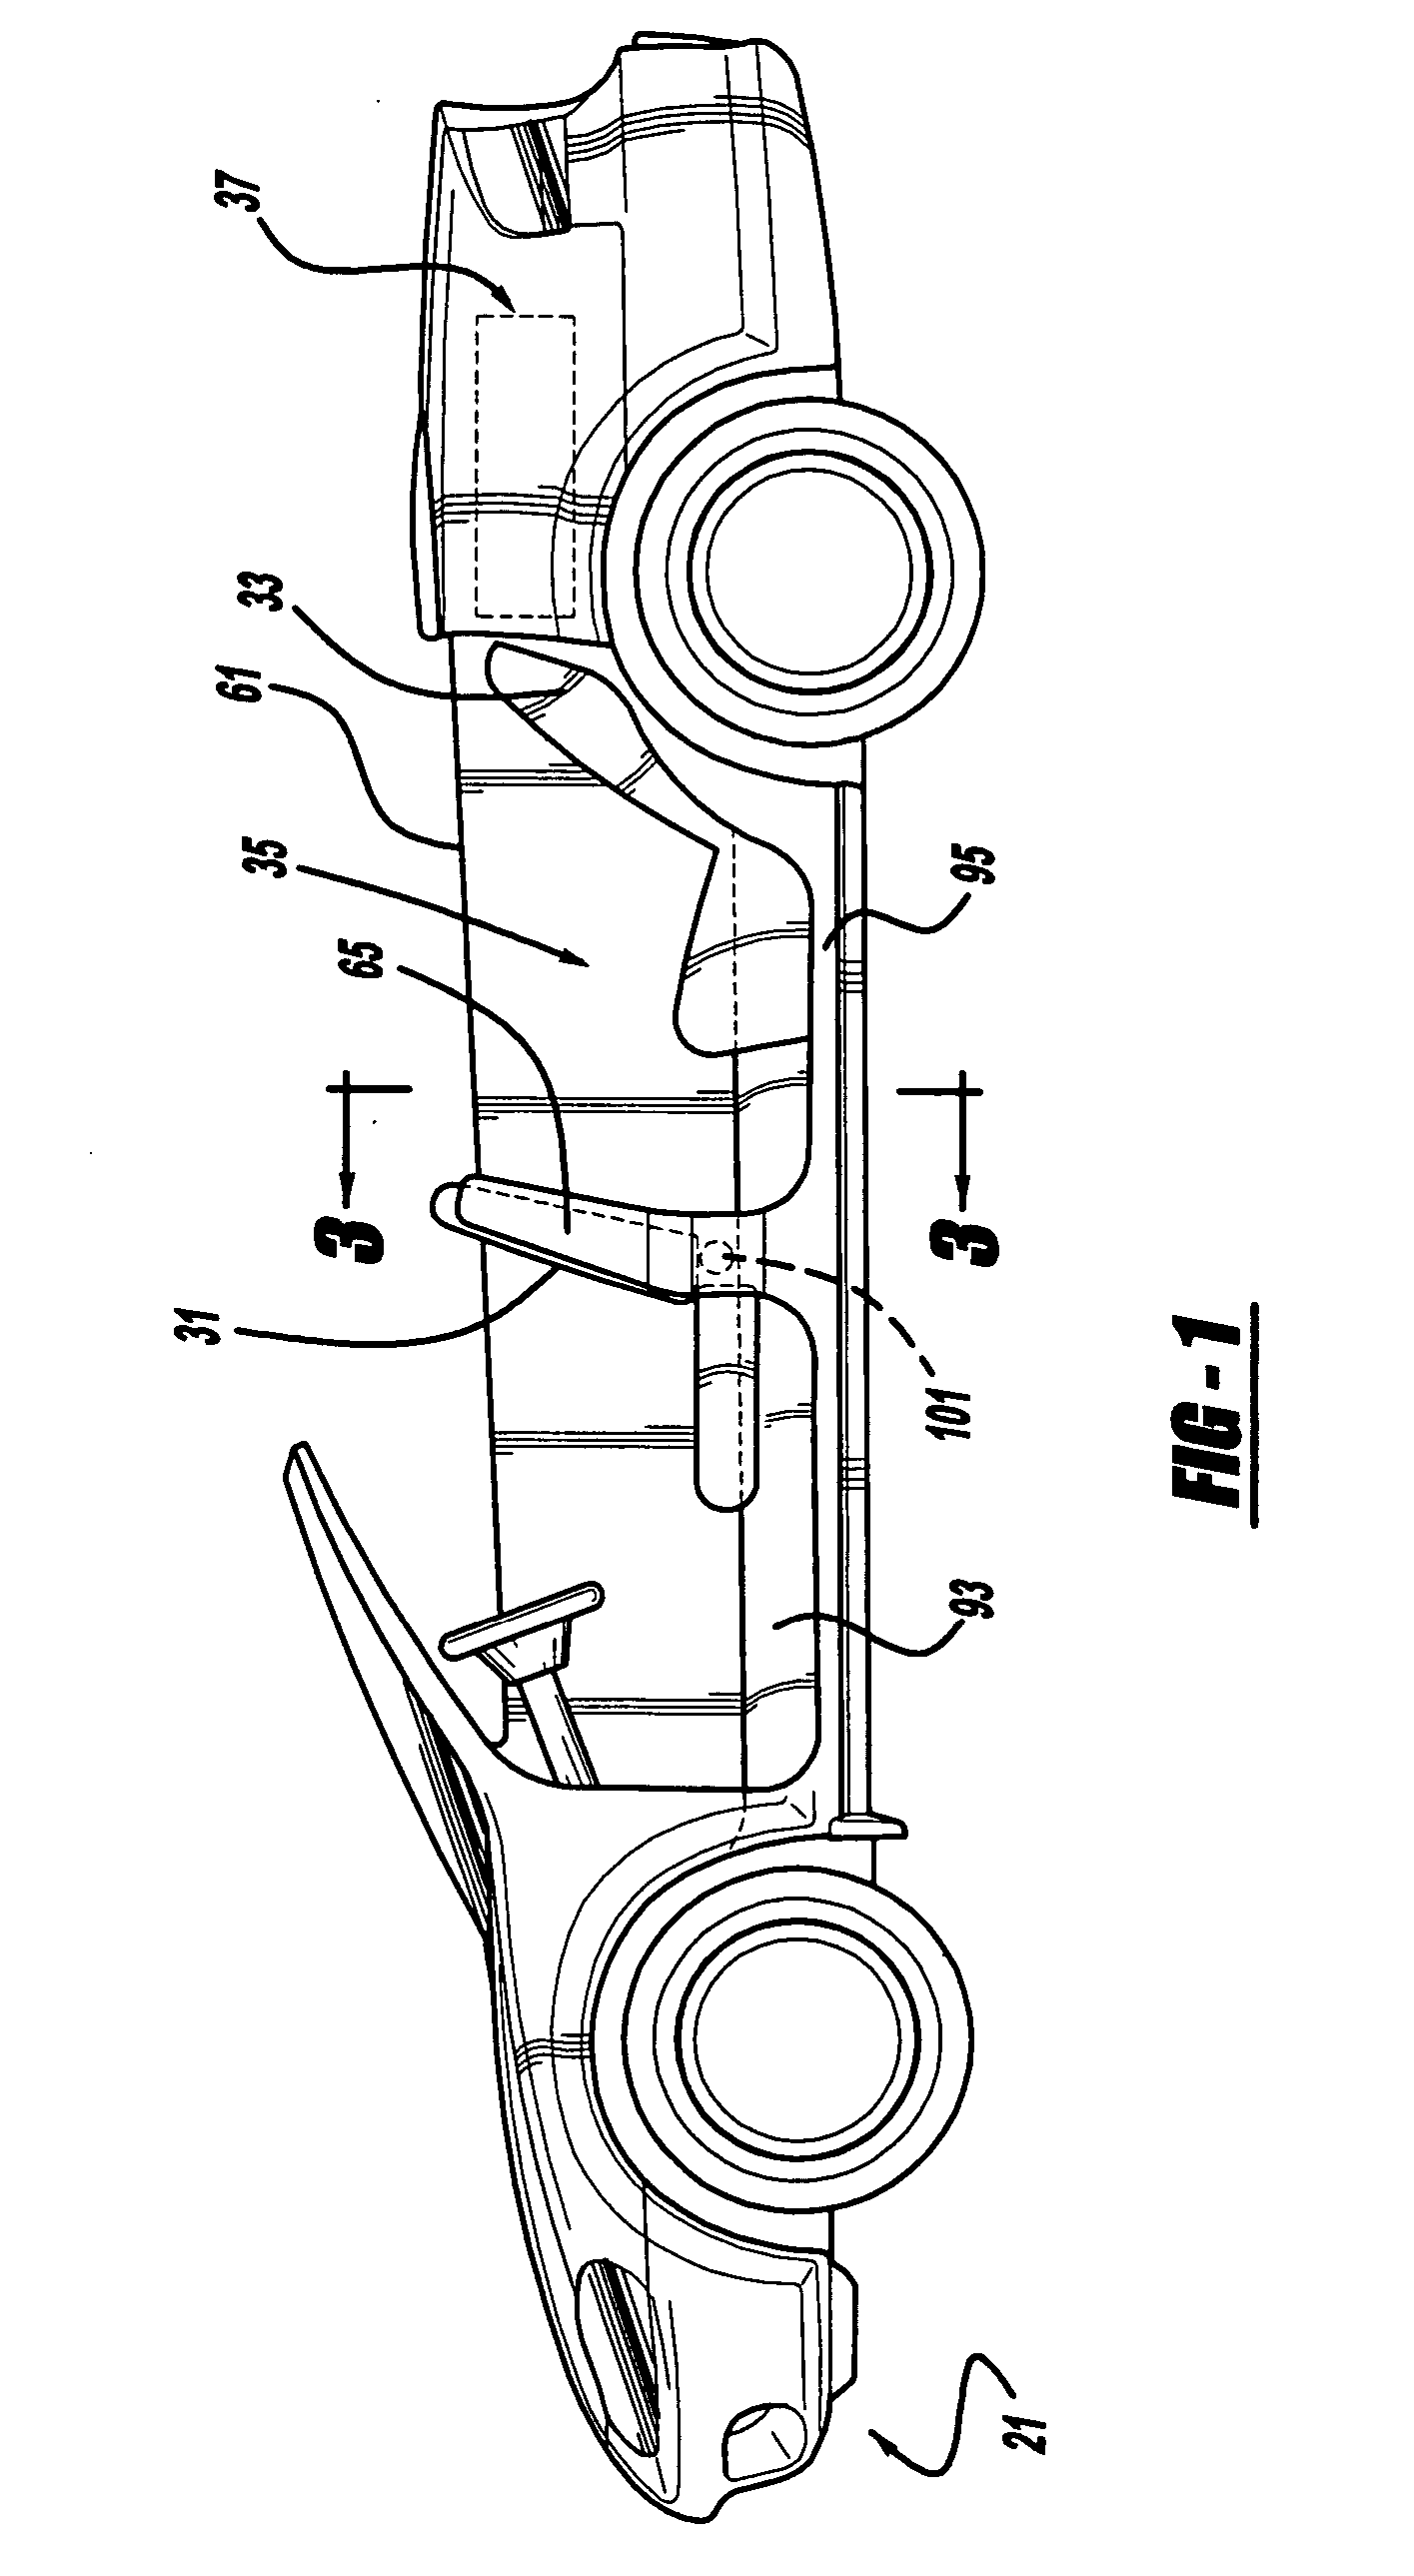 Structural seat system for an automotive vehicle